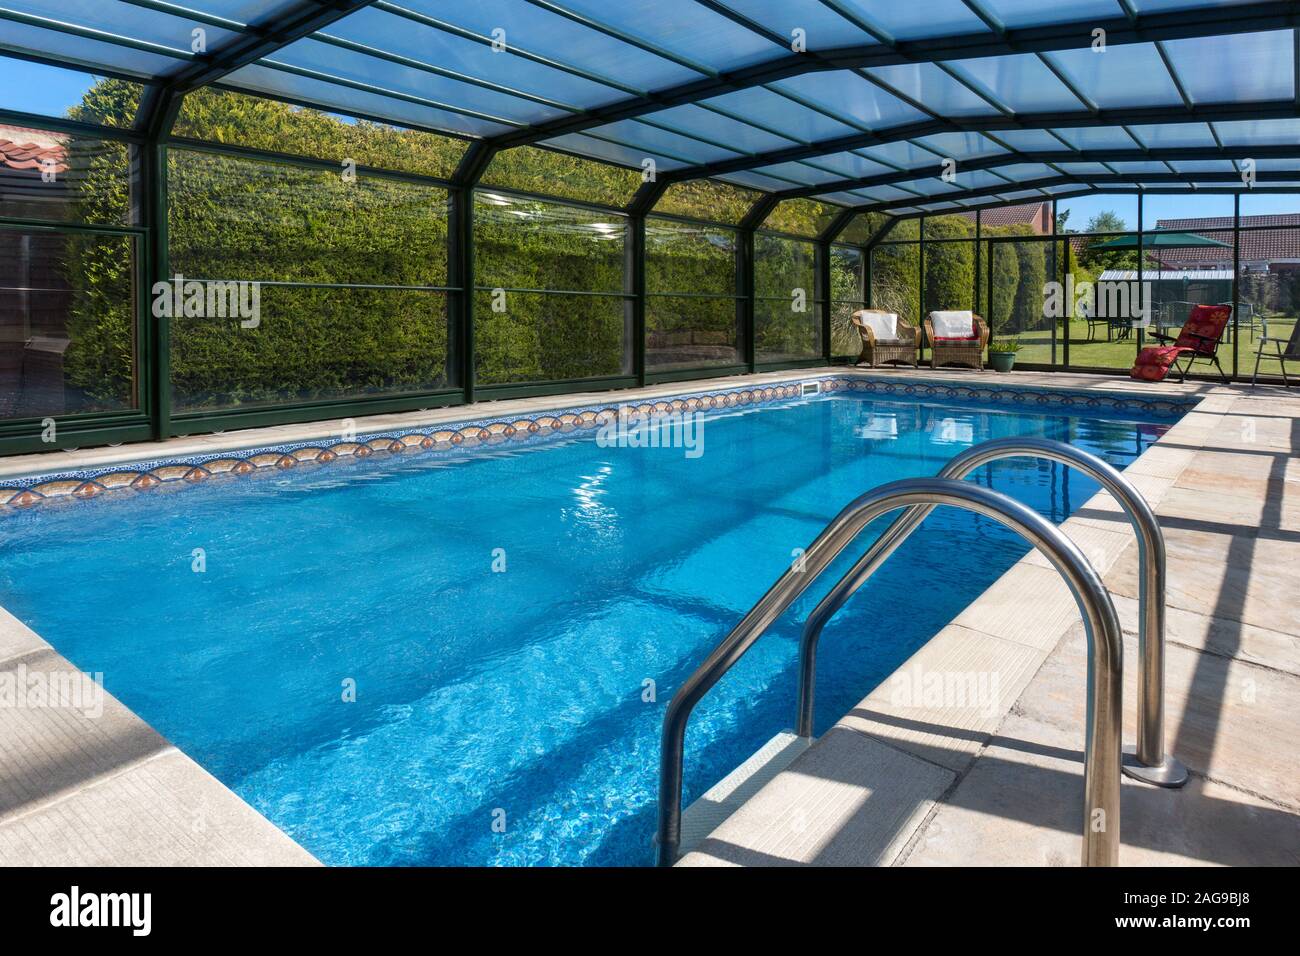 Slingsby. England. 06.08.13. Swimming pool in the garden of a large country property in Yorkshire, England. Stock Photo